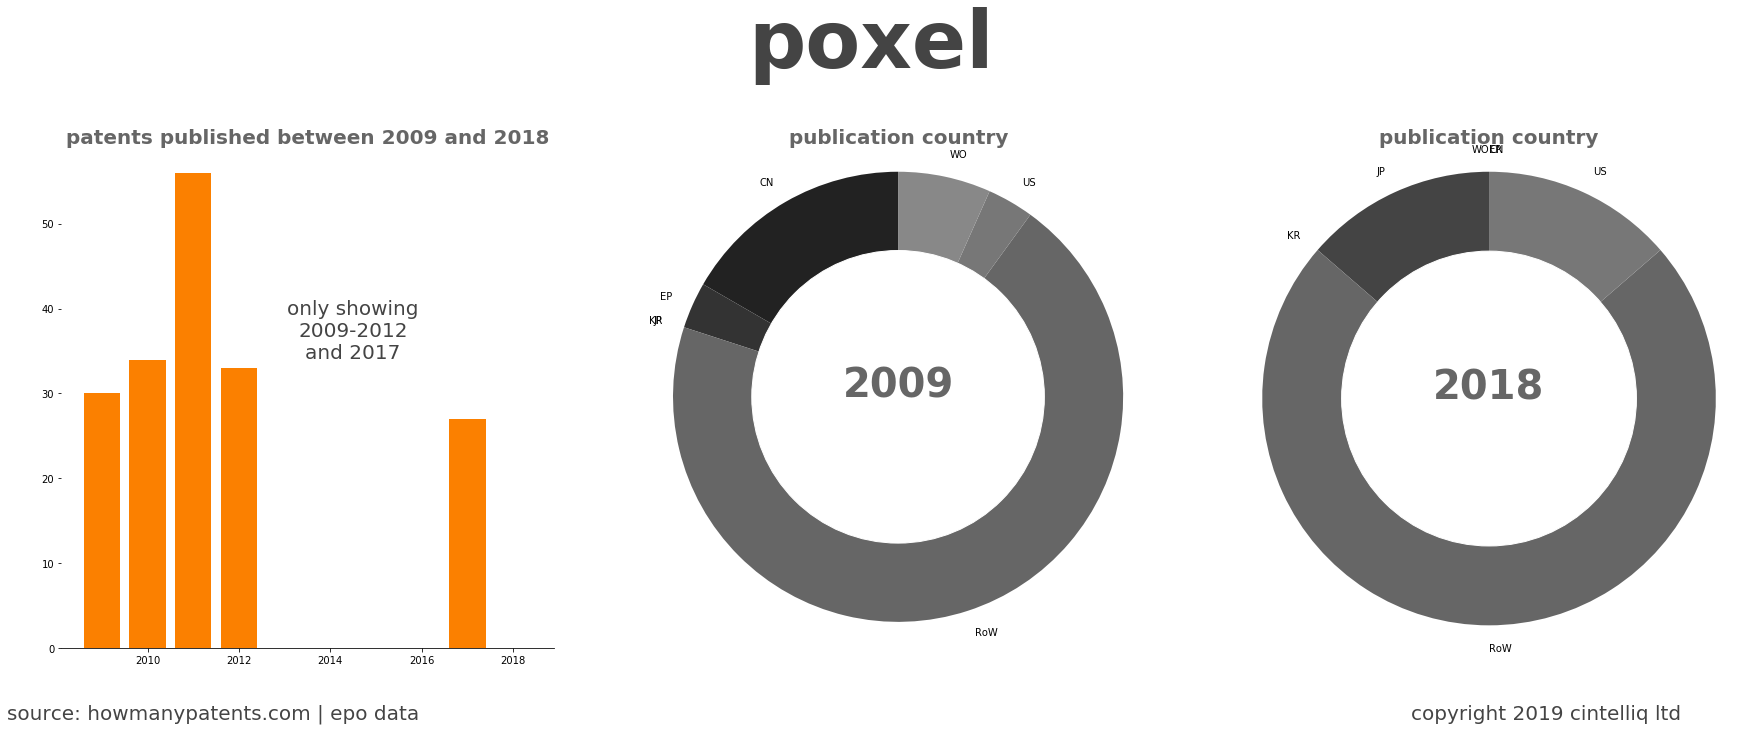 summary of patents for Poxel